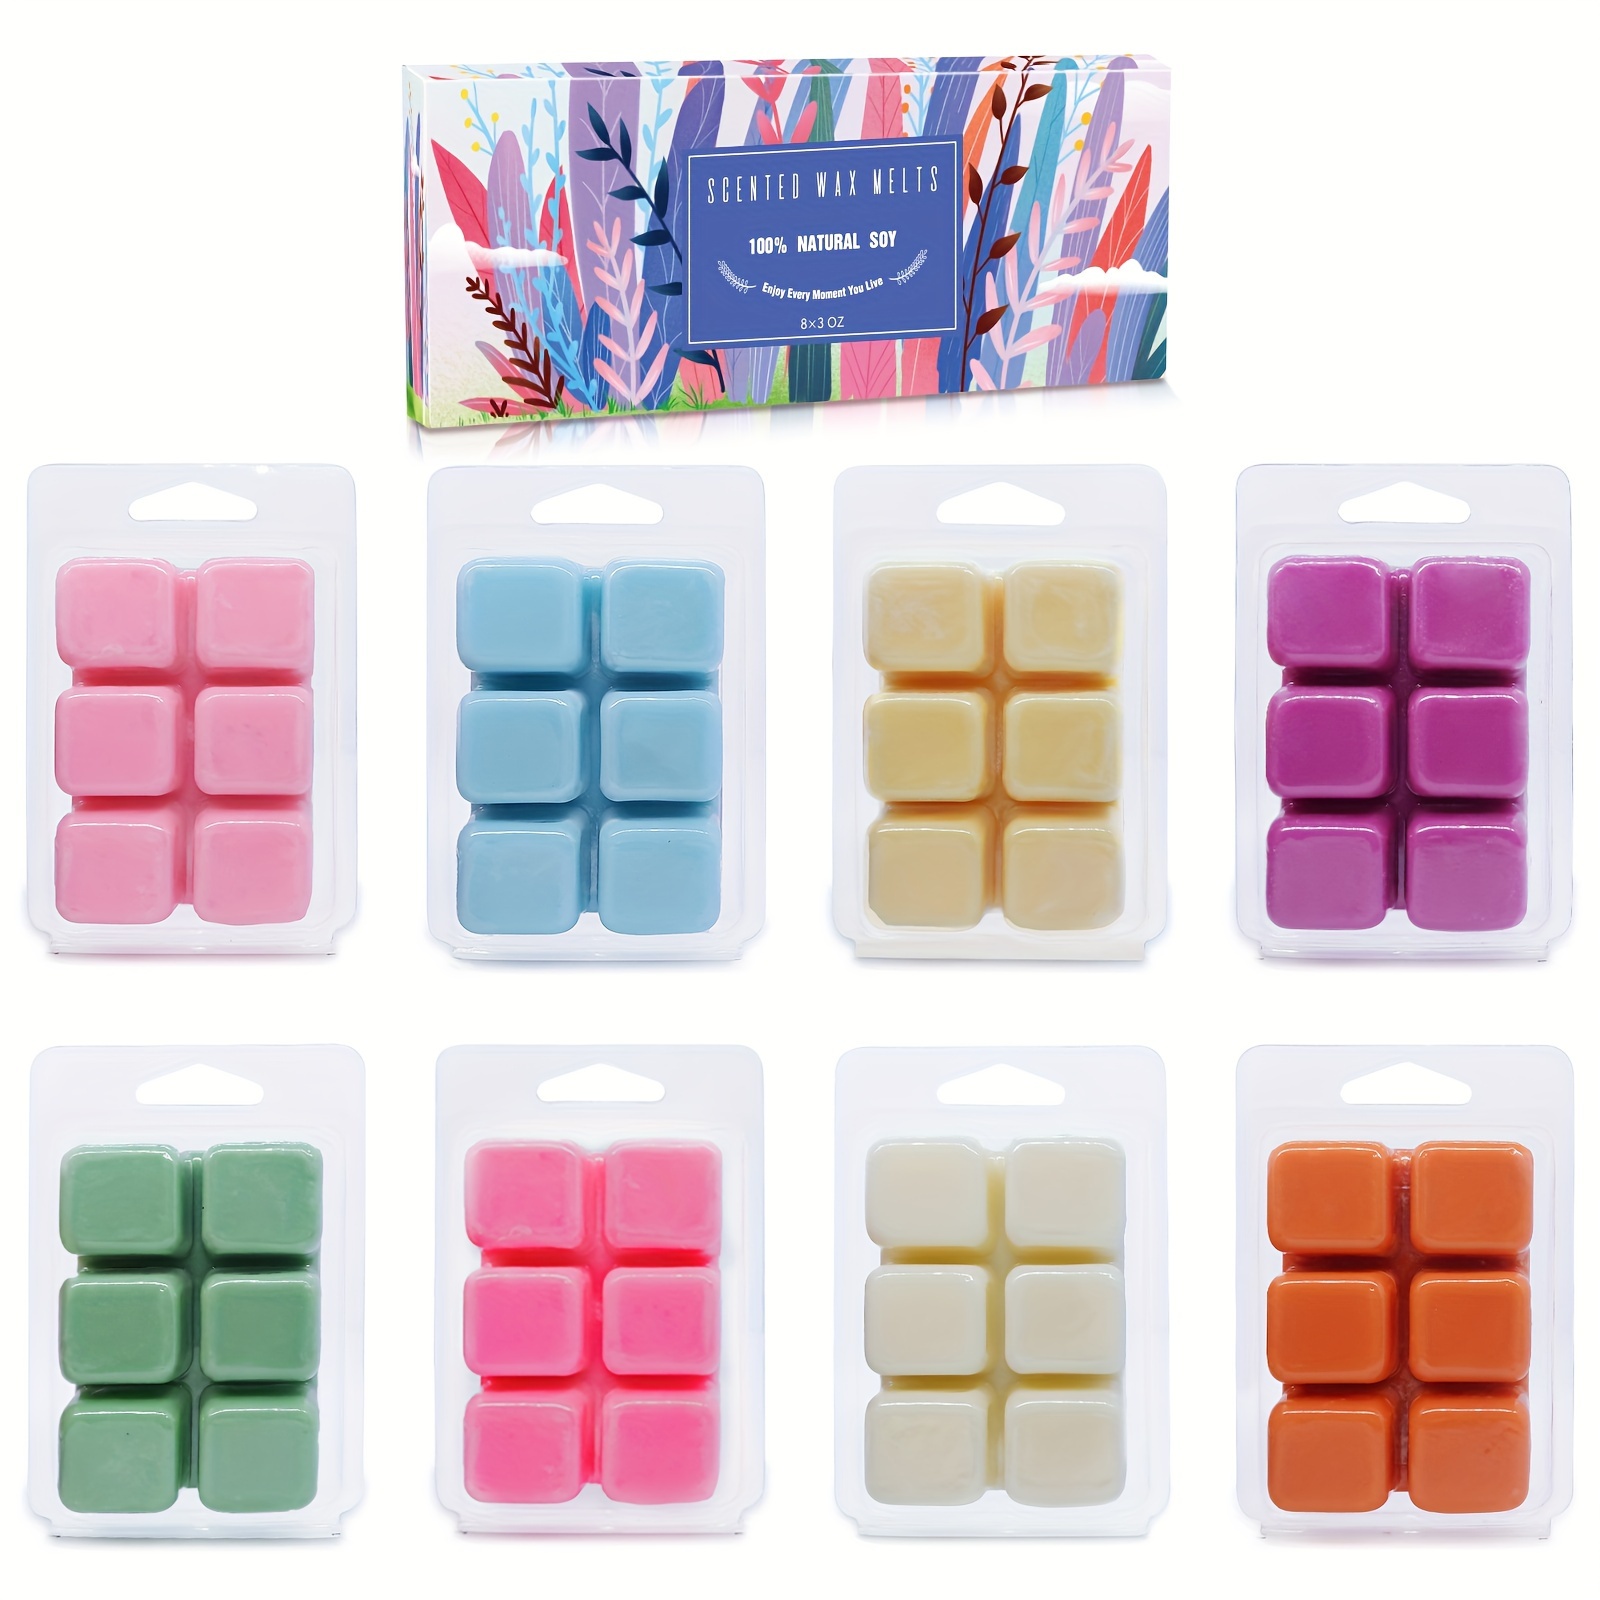 Scented Wax Melts by The Candleroom Philippines